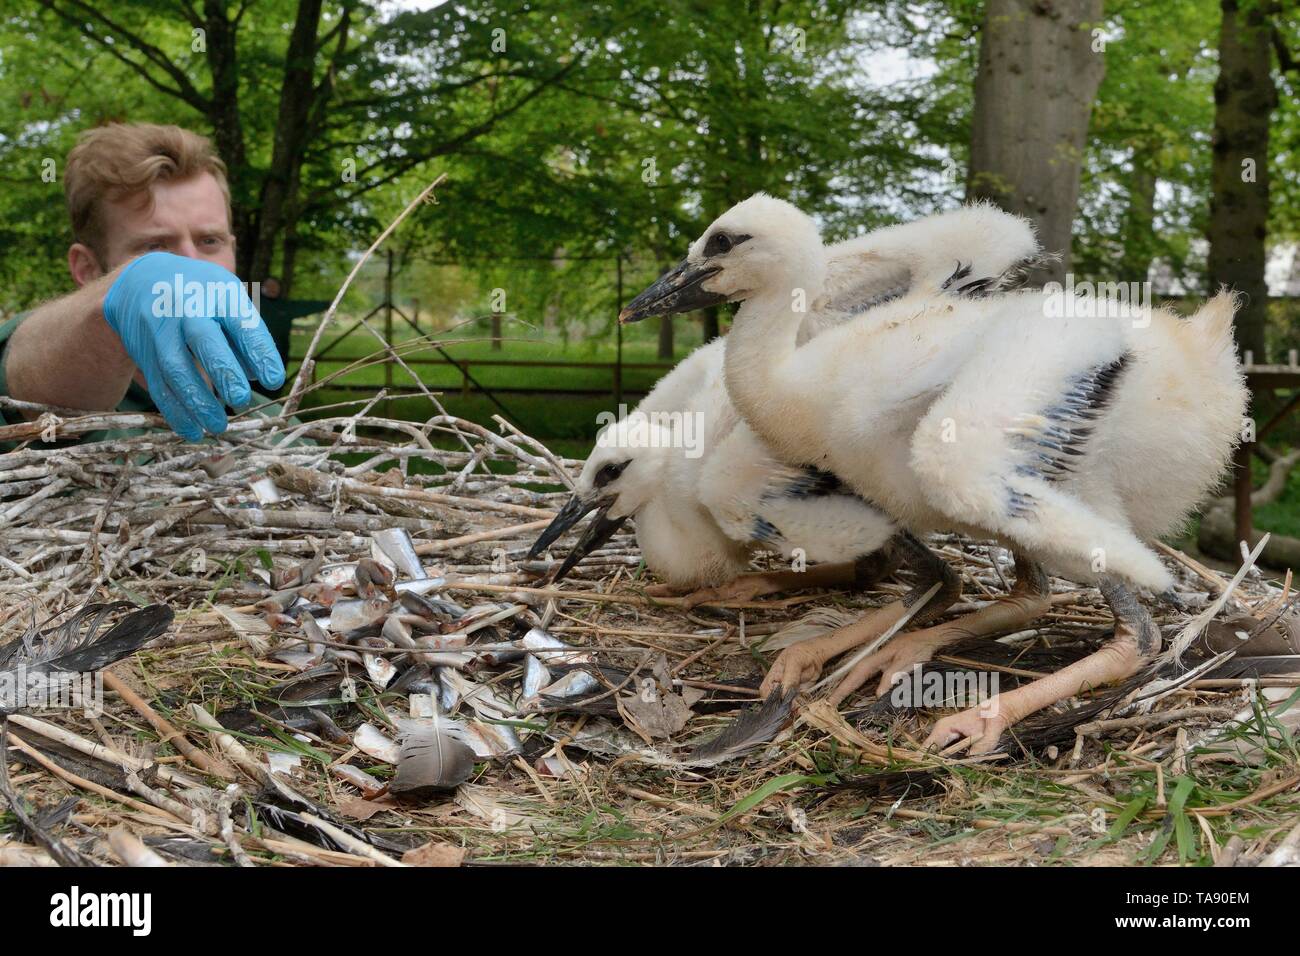 Keeper feeding White stork (Ciconia ciconia) chicks in a captive breeding colony supplying UK White Stork reintroductions, Cotswold Wildlife Park. Stock Photo